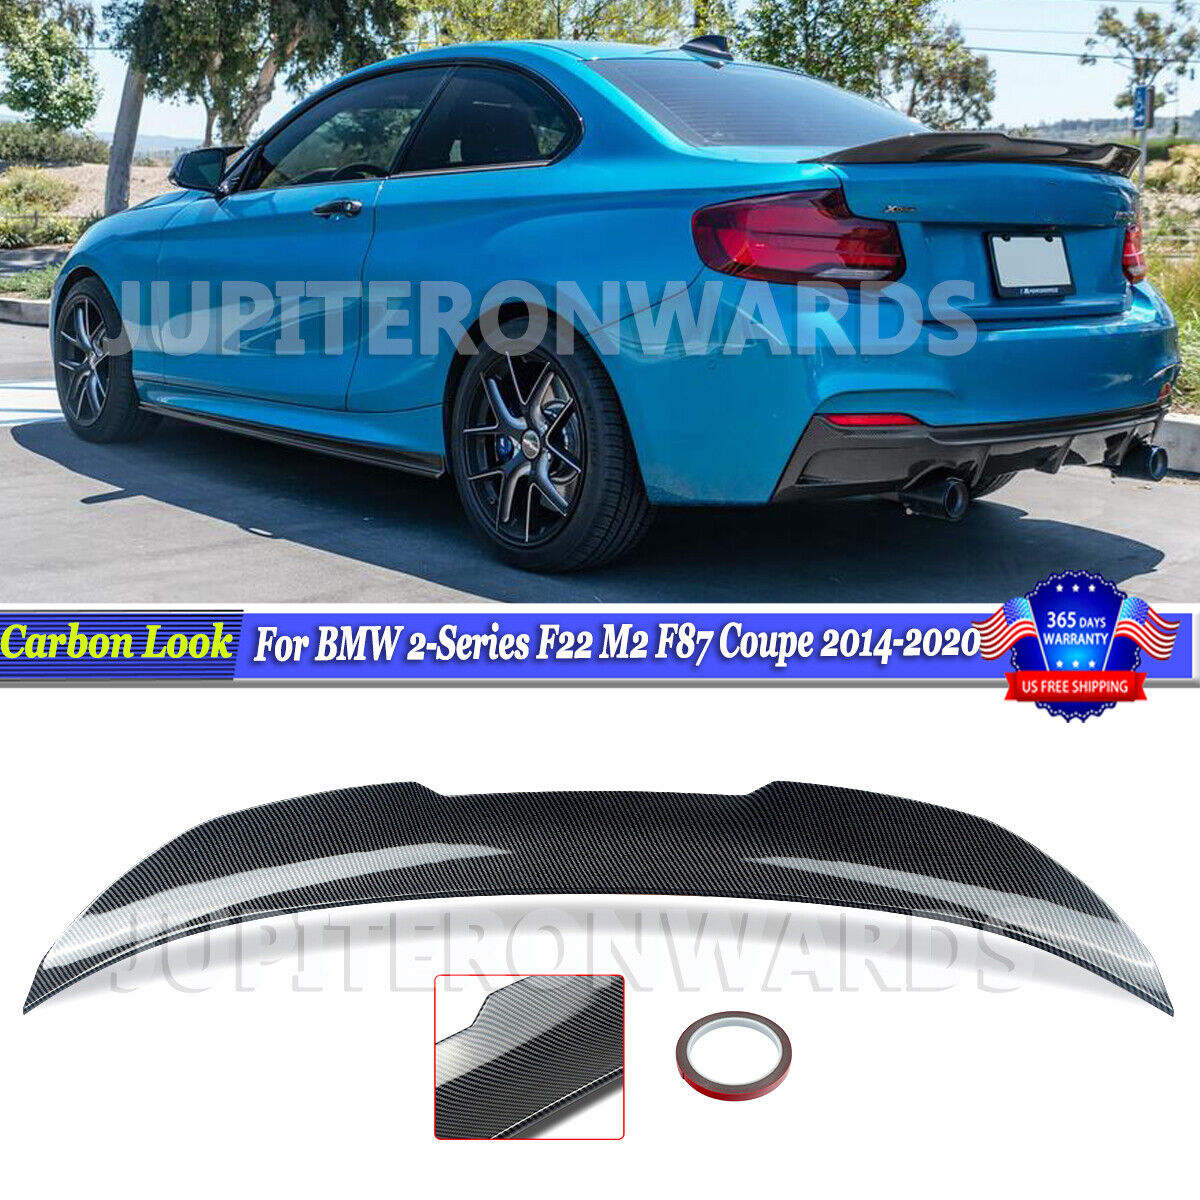 For BMW F22 M235i M240I M2 F87 Coupe 2014-2020 Carbon Look Rear Spoiler Wing PSM